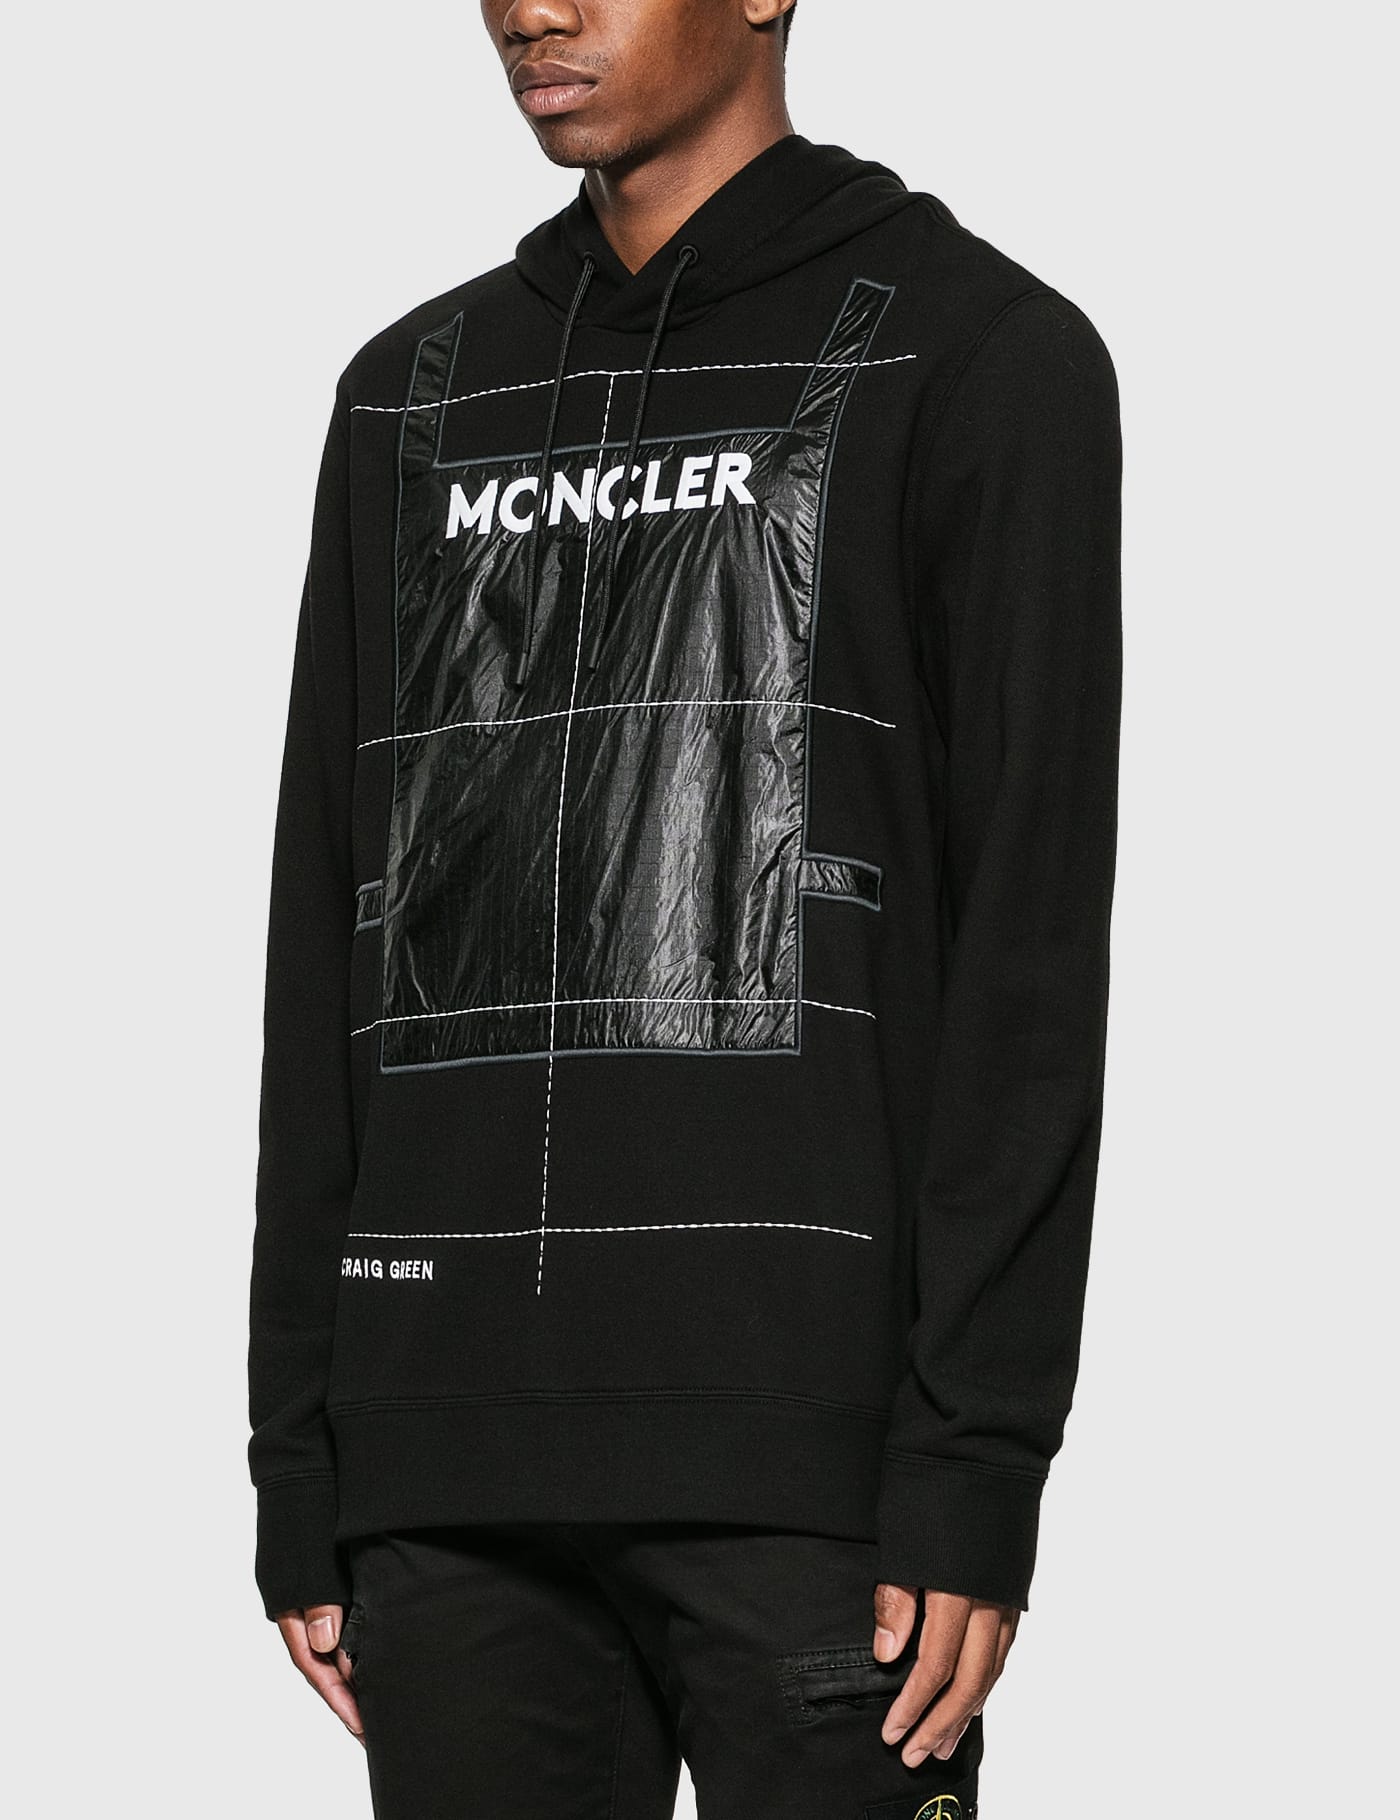 moncler for skiing